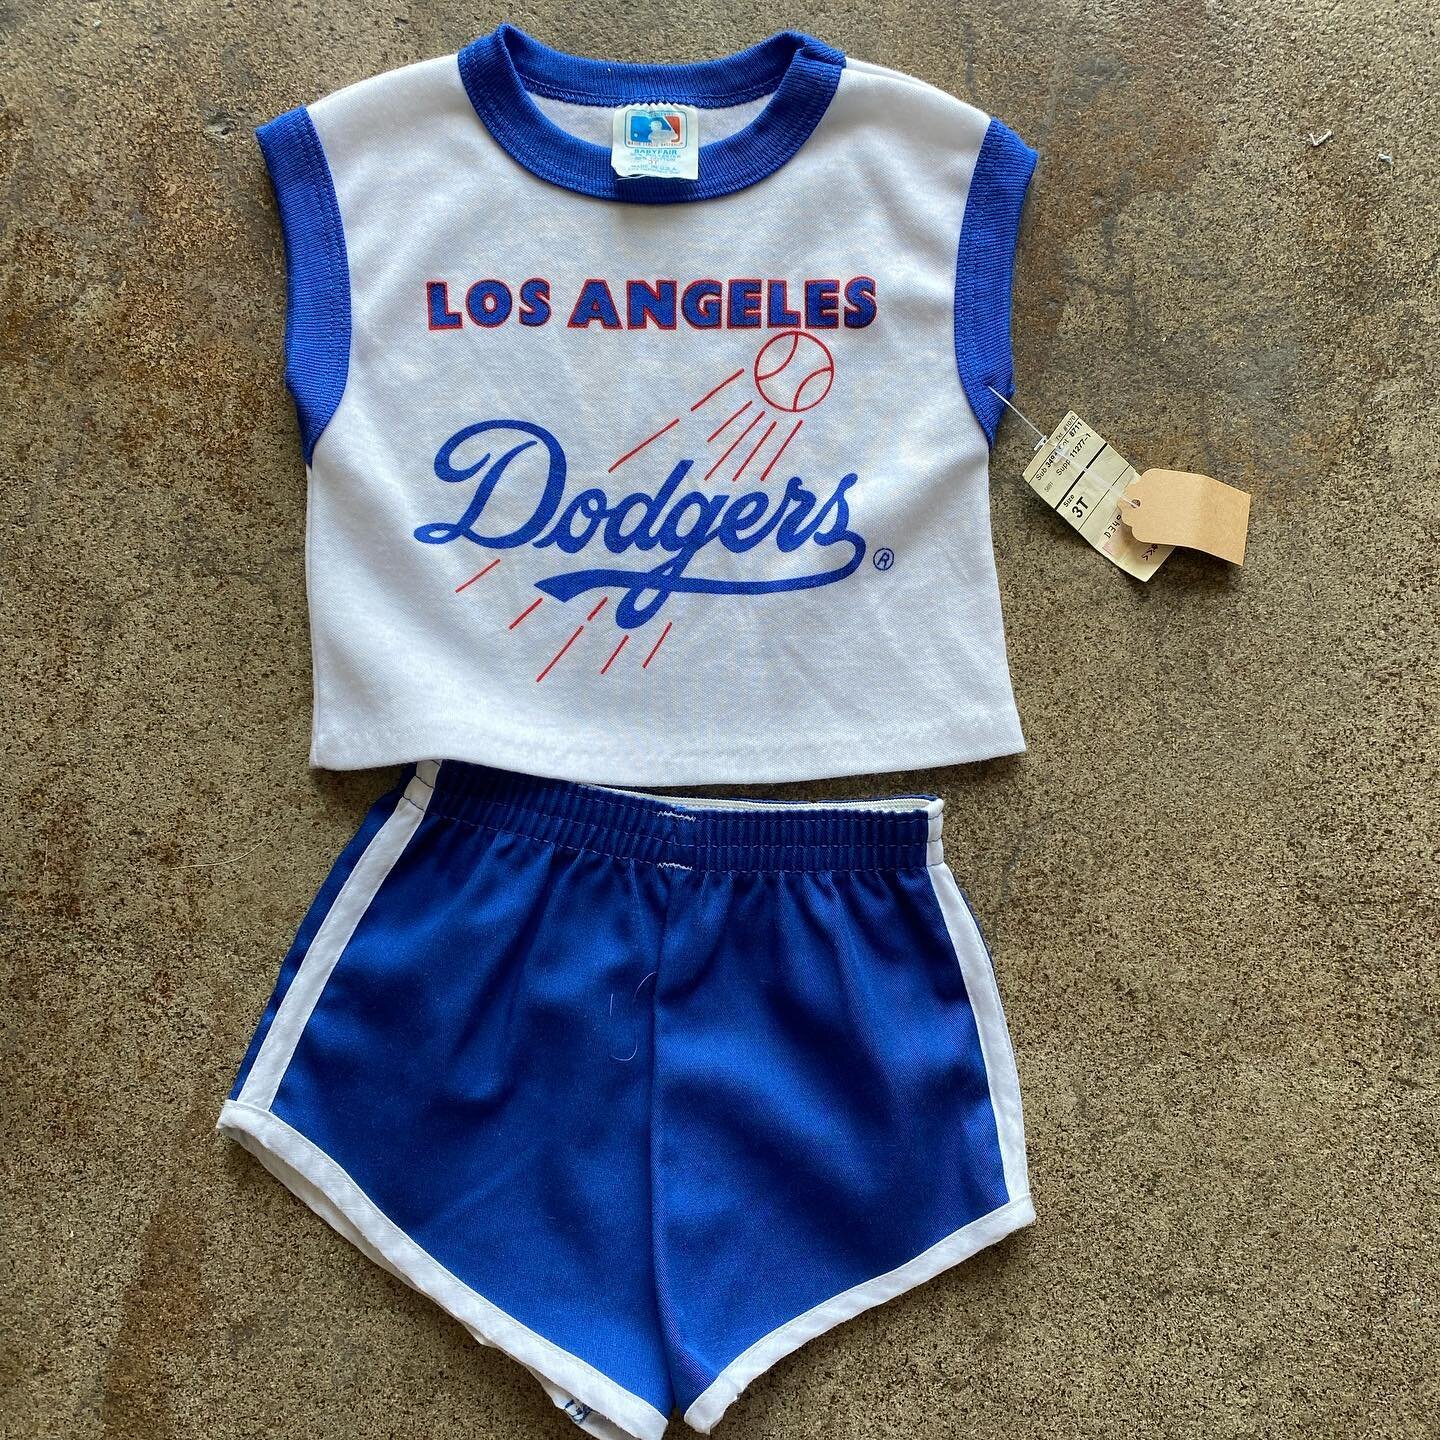 Go Dodgers! This dead stock 3t outfit went to a good home today 💕⚾️